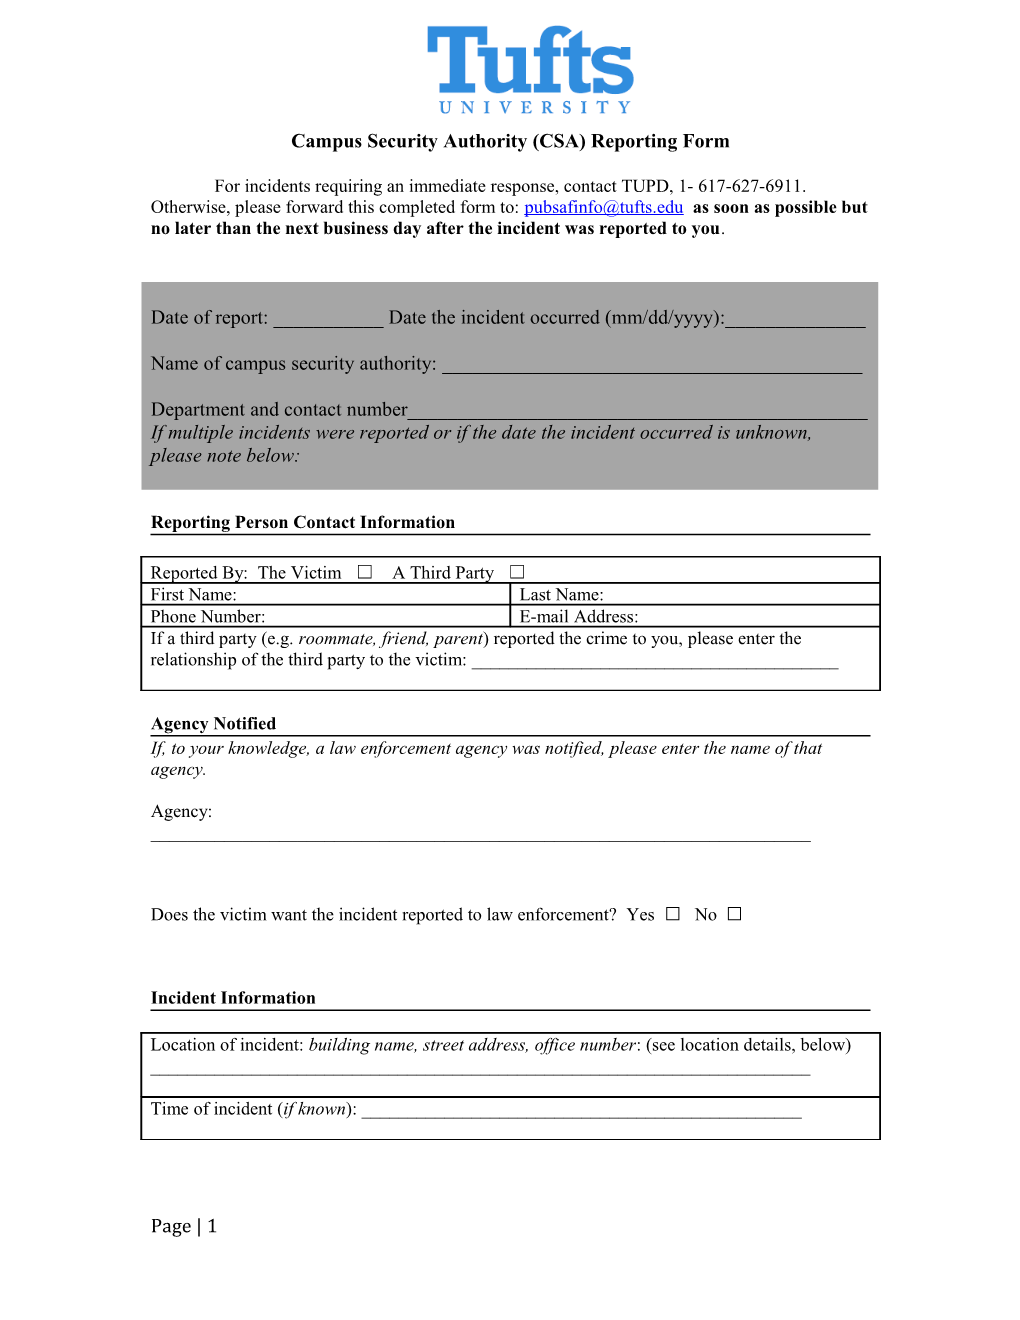 Campus Security Authority Reporting Form